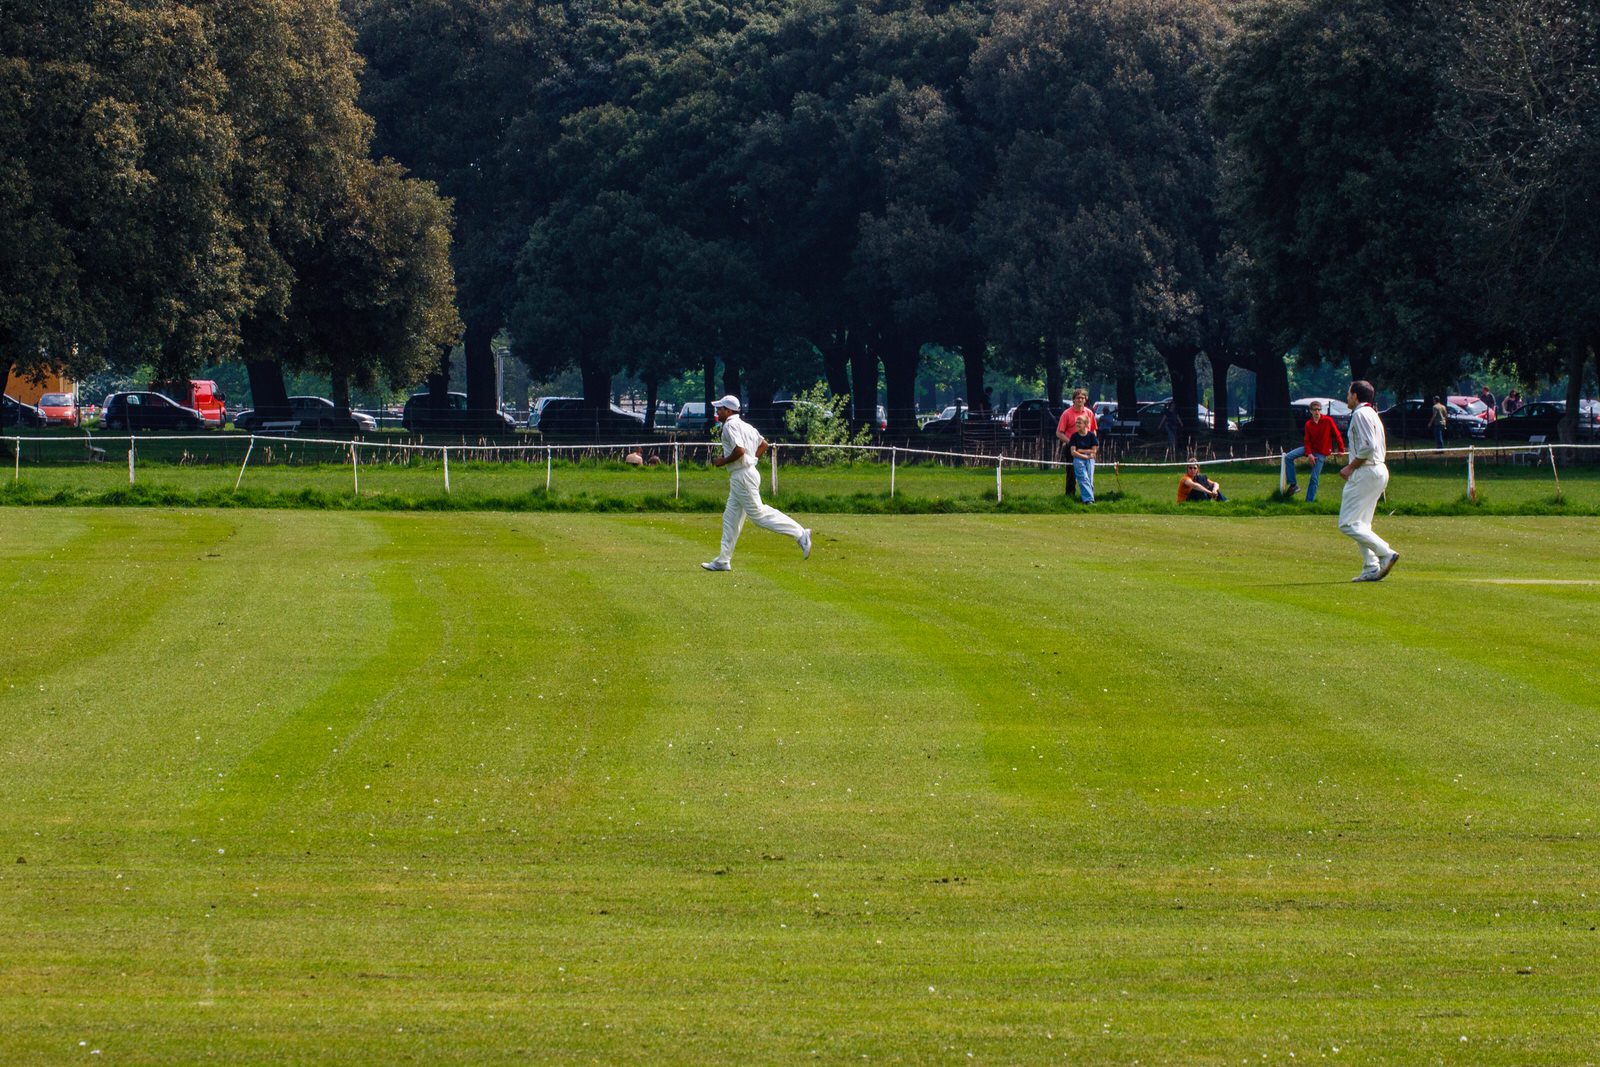 TWO CRICKET CLUBS IN PHOENIX PARK NEAR THE WELLINGTON MONUMENT 030